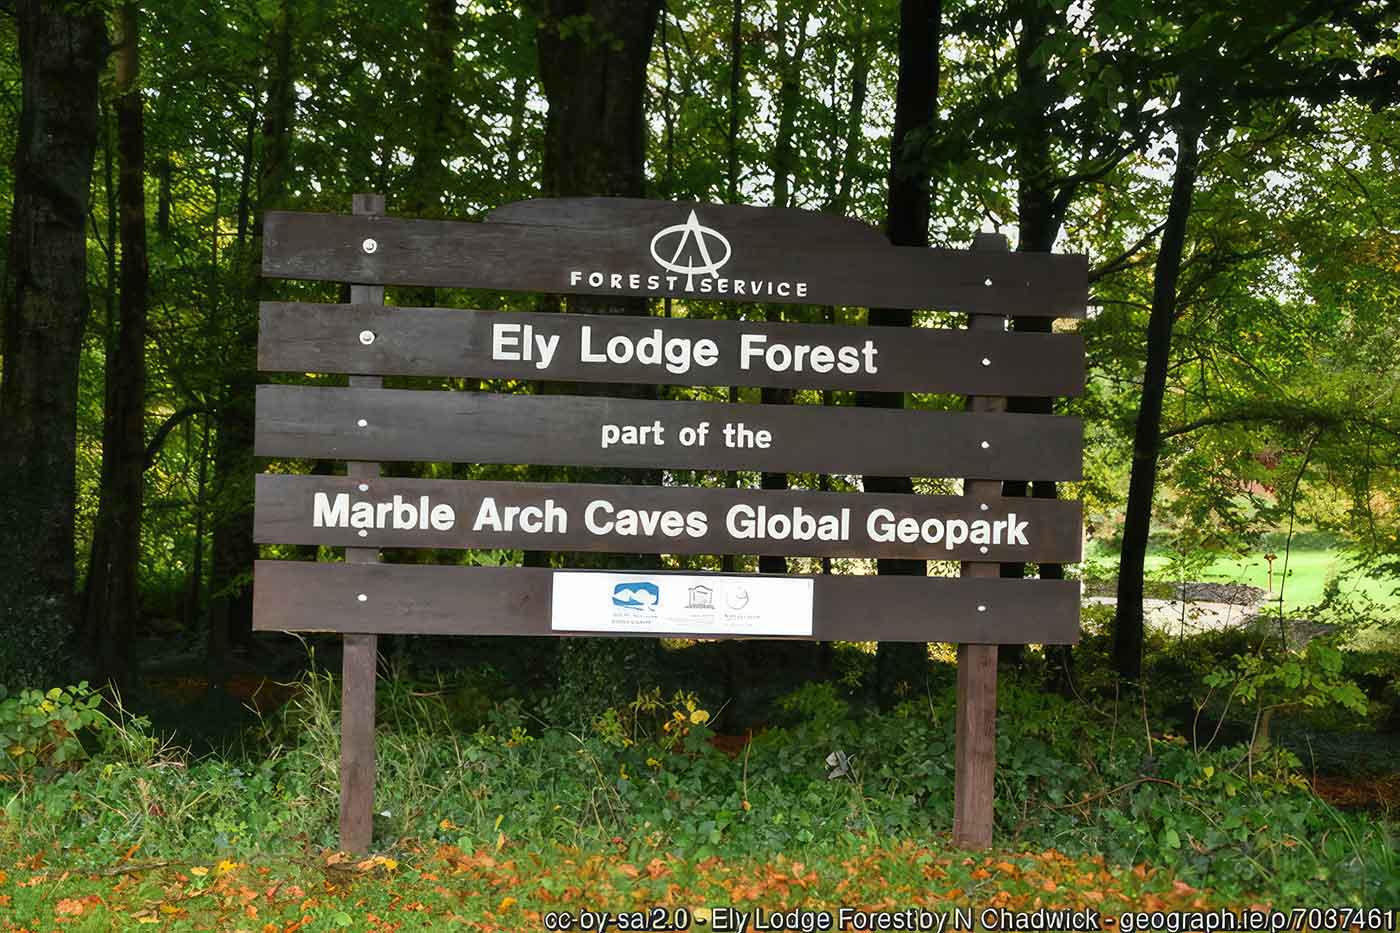 Ely Lodge Forest